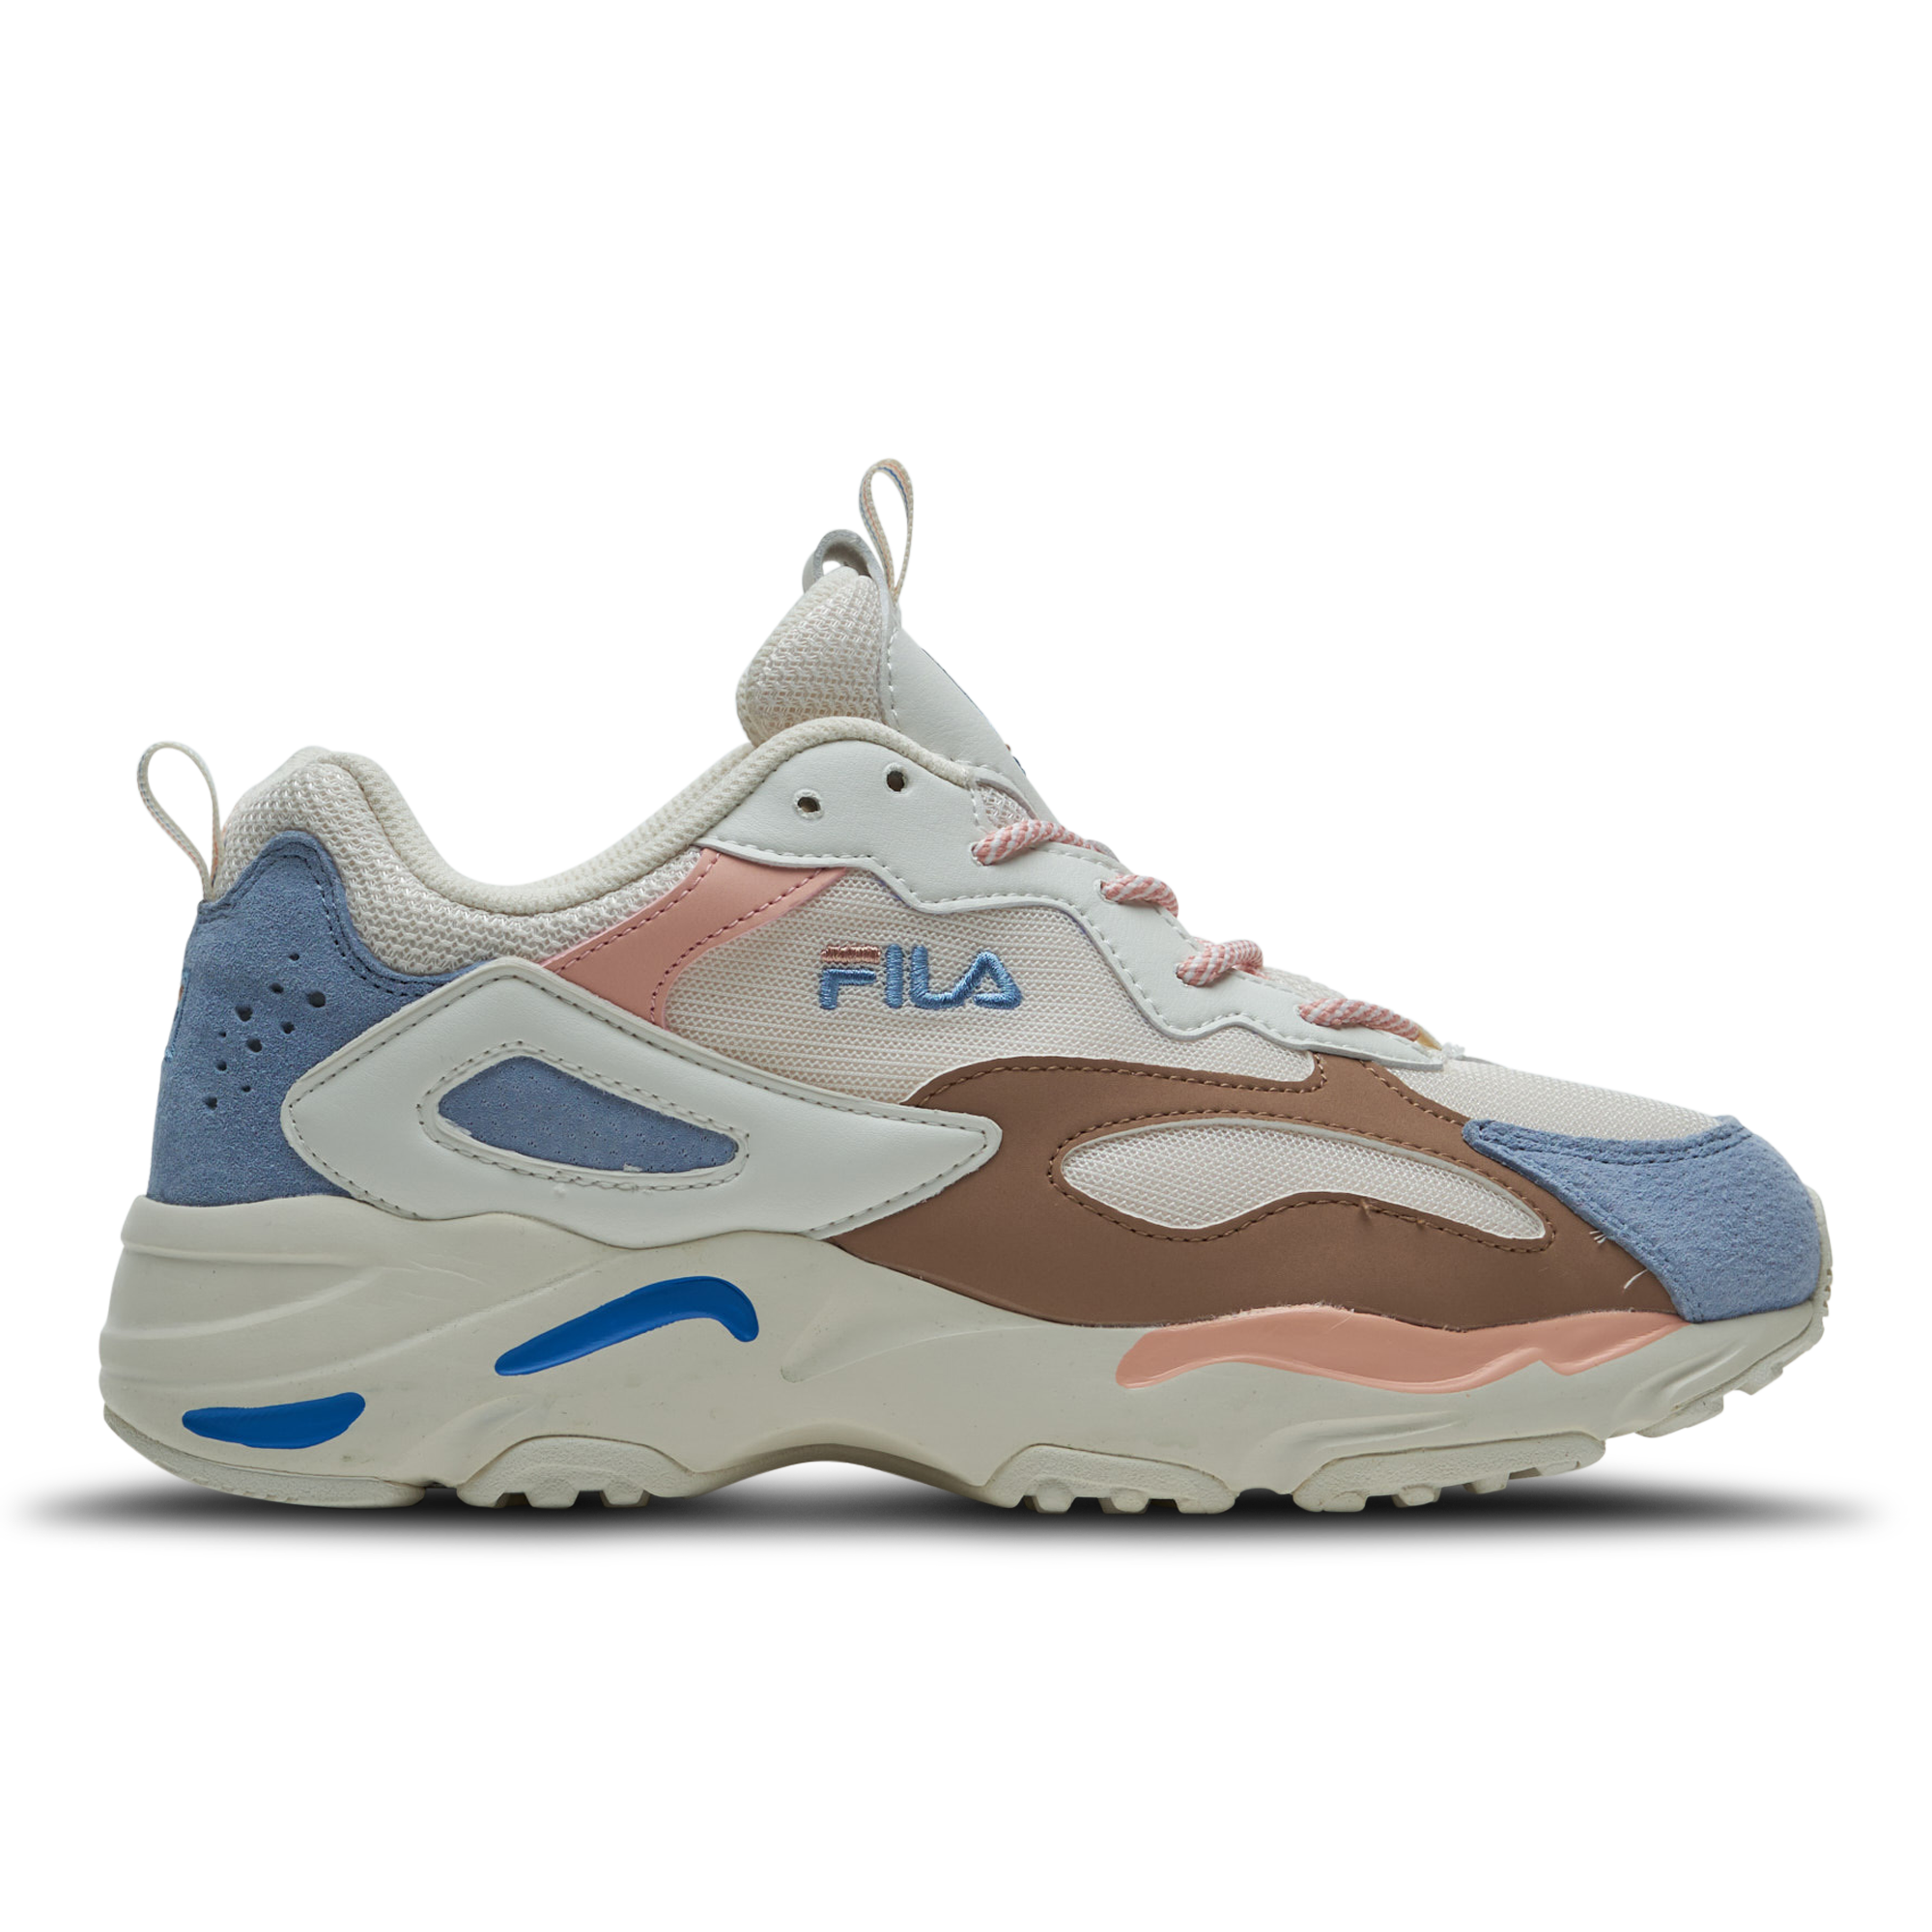 chaussure fila ray tracer femme